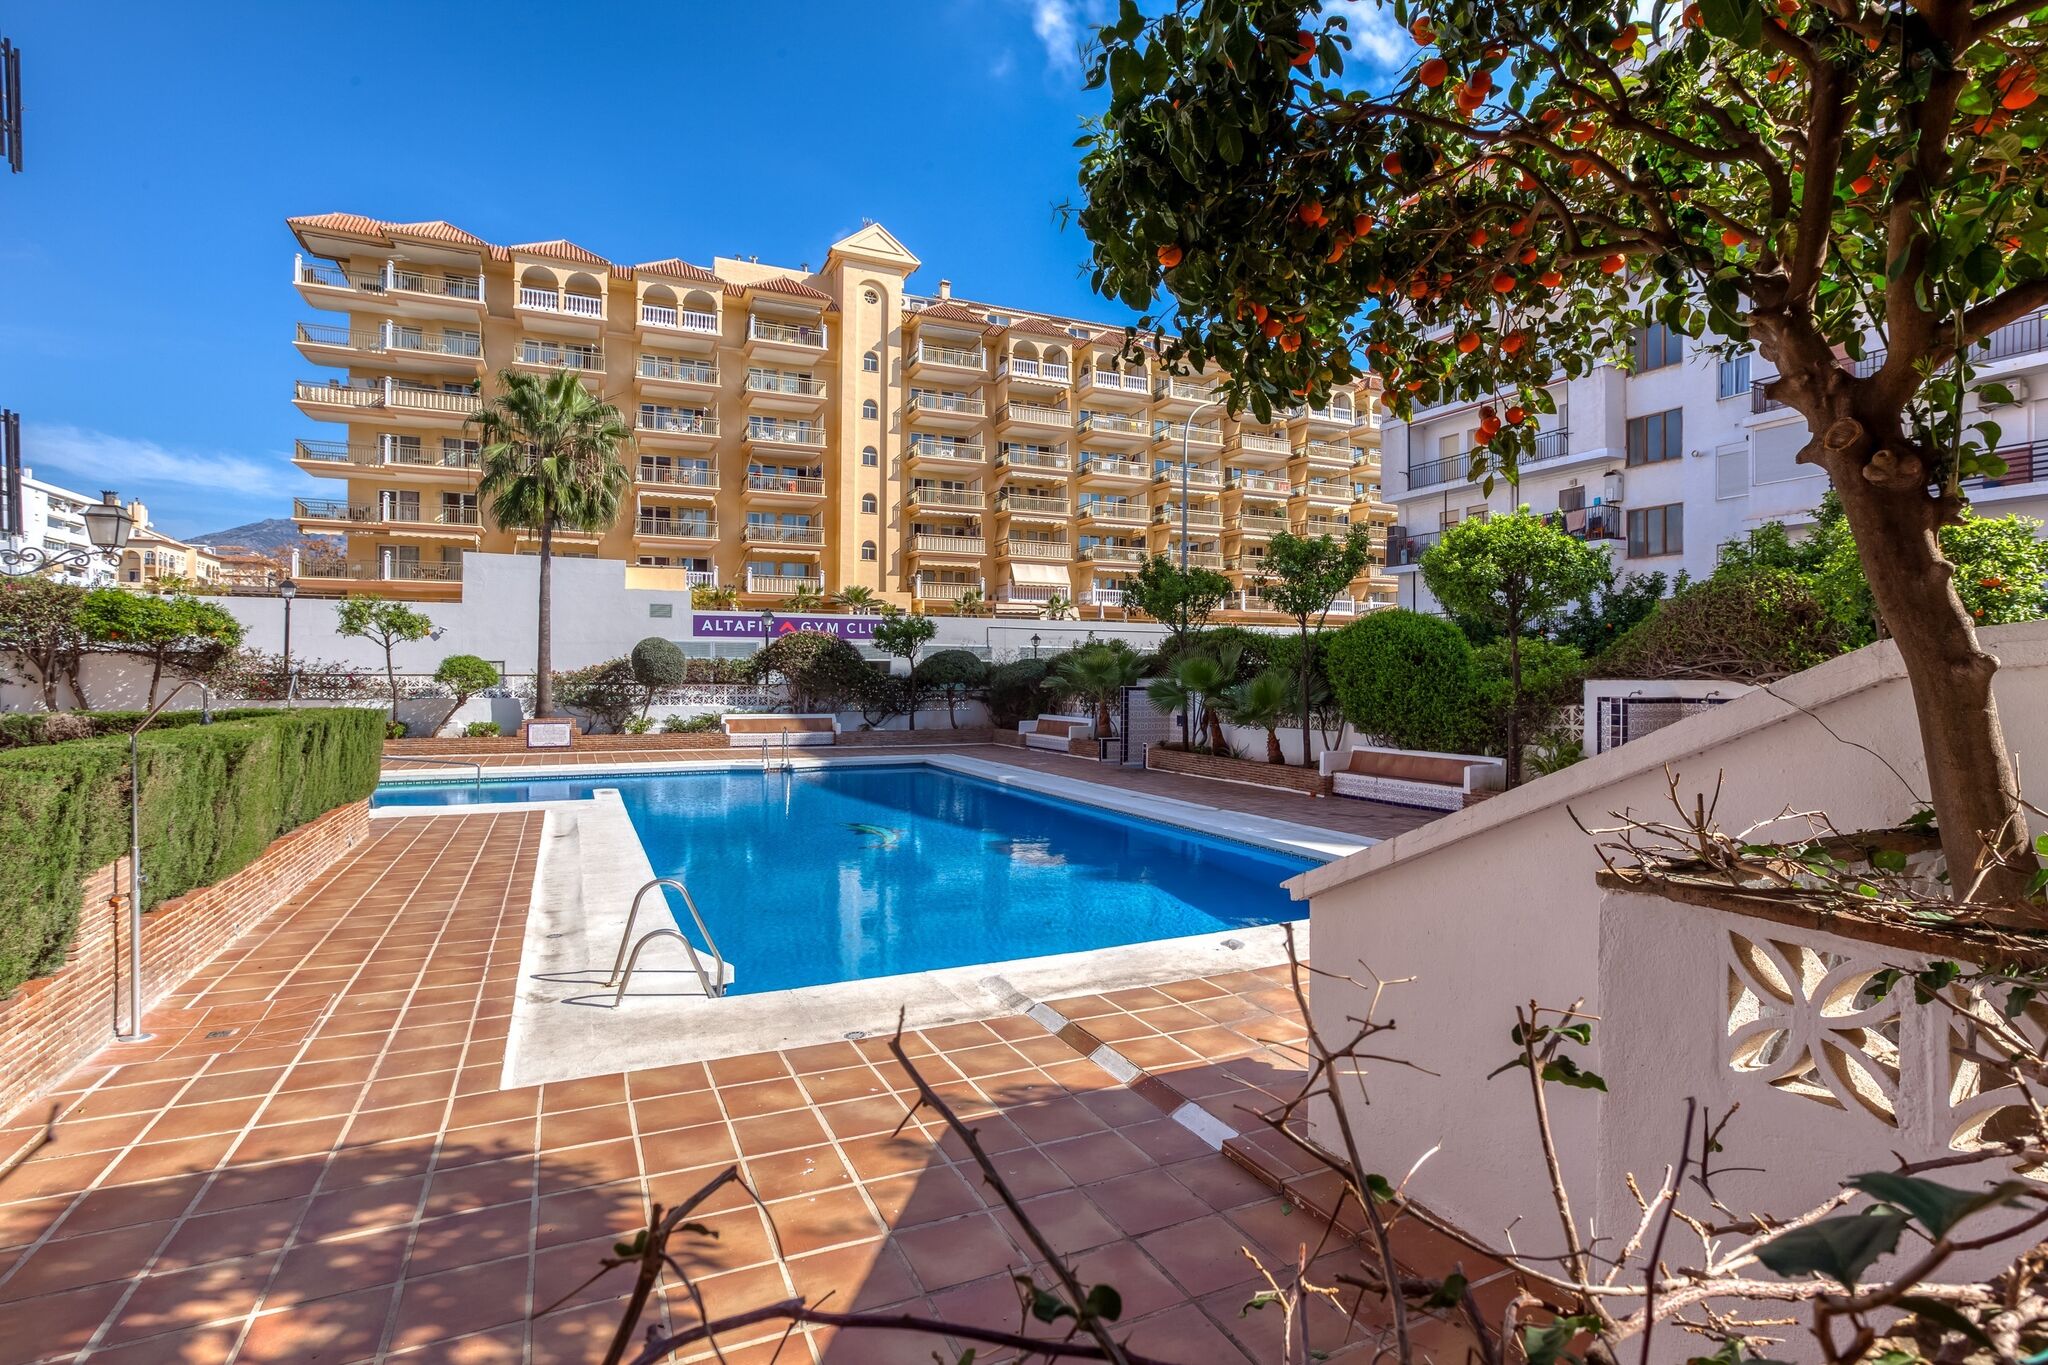 Unique Apartments To Rent In Fuengirola Spain for Small Space